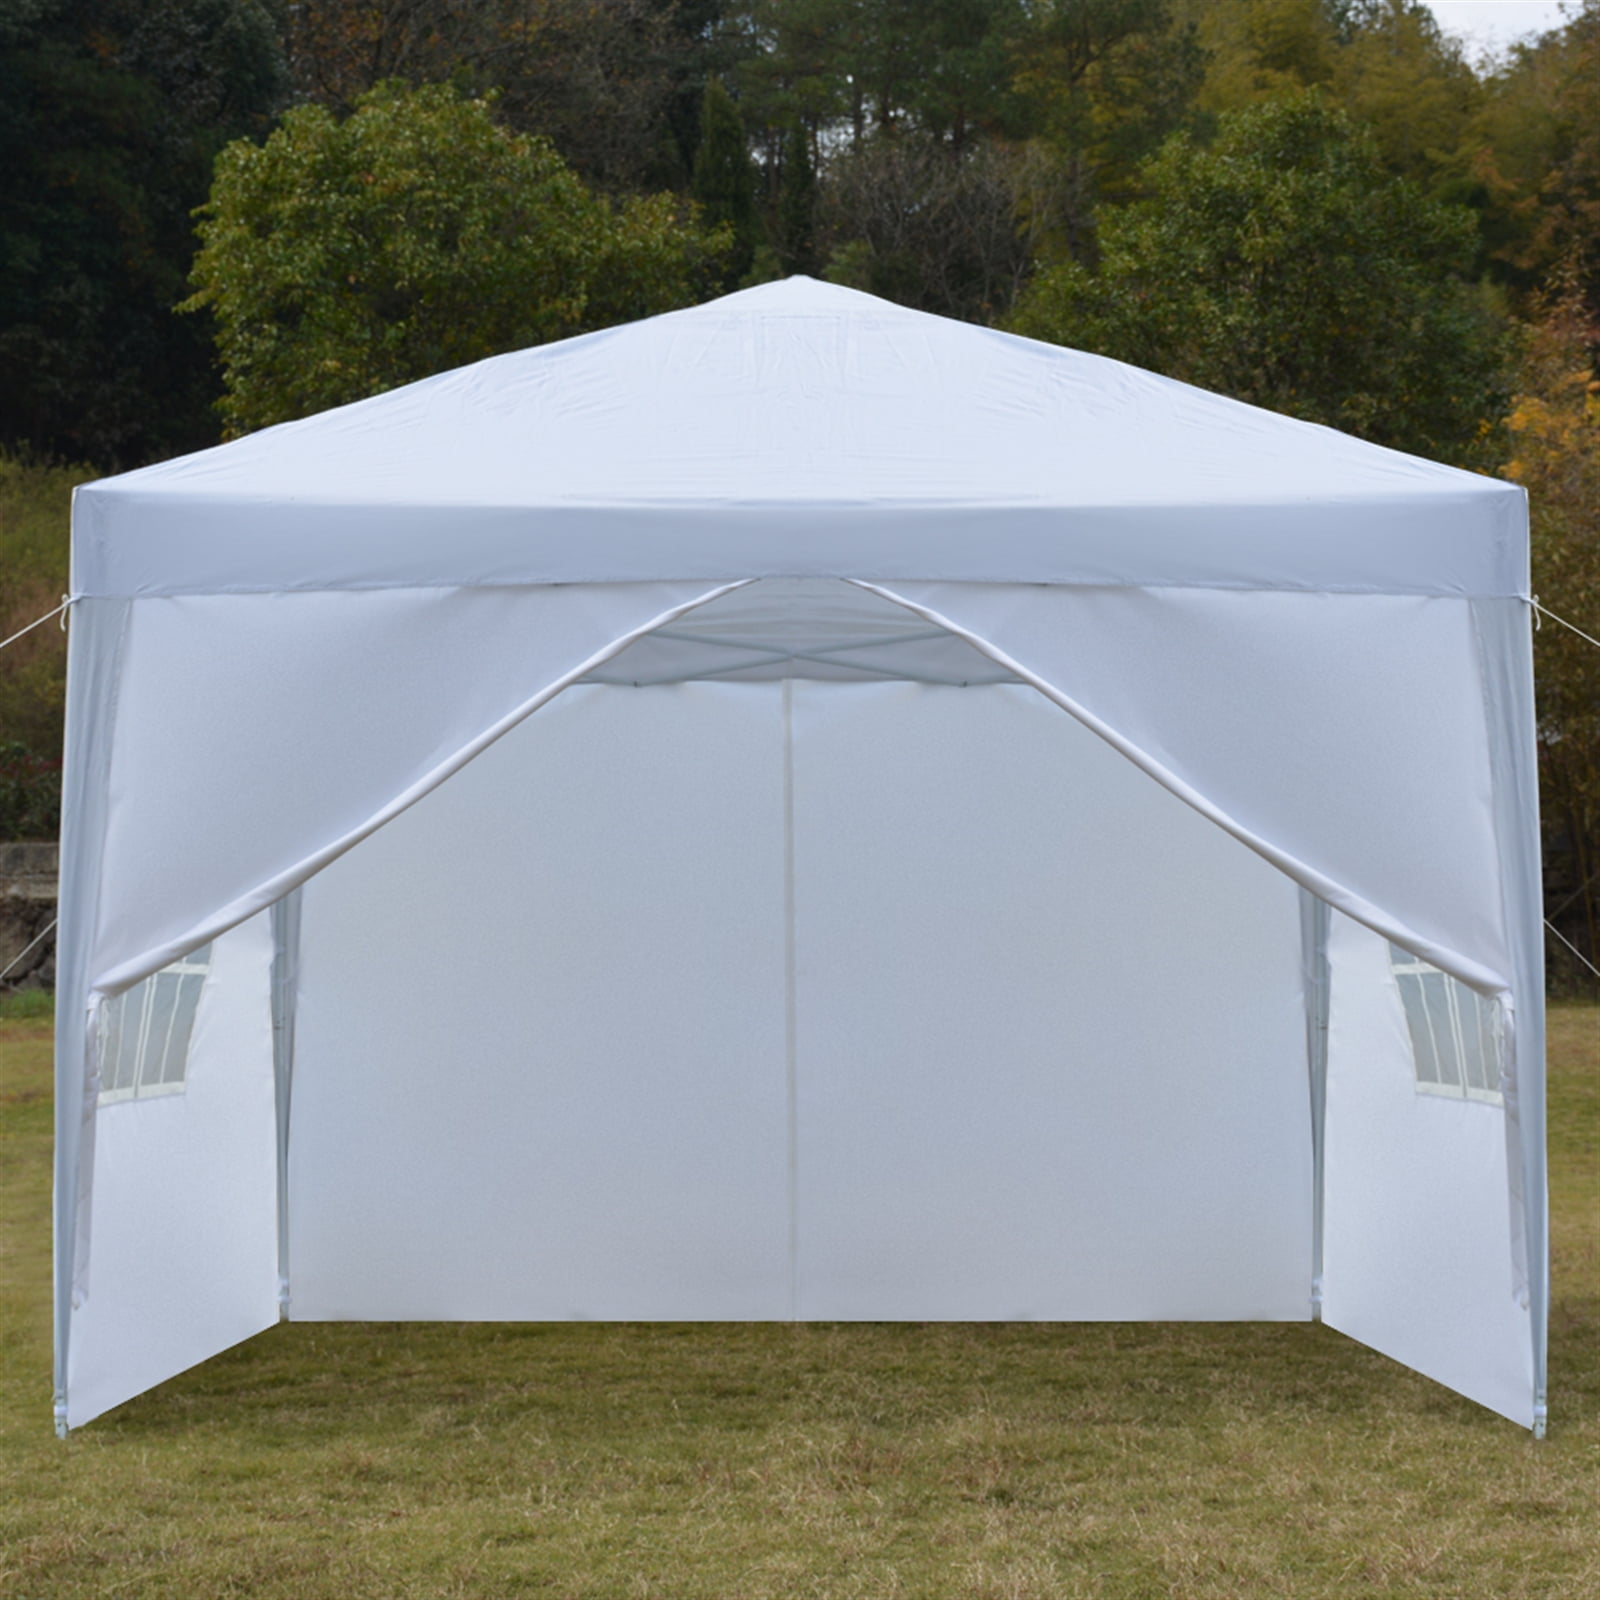 10x10ft Portable Gazebo Tent Outdoor Canopy Event Shelter Sun Shade White 